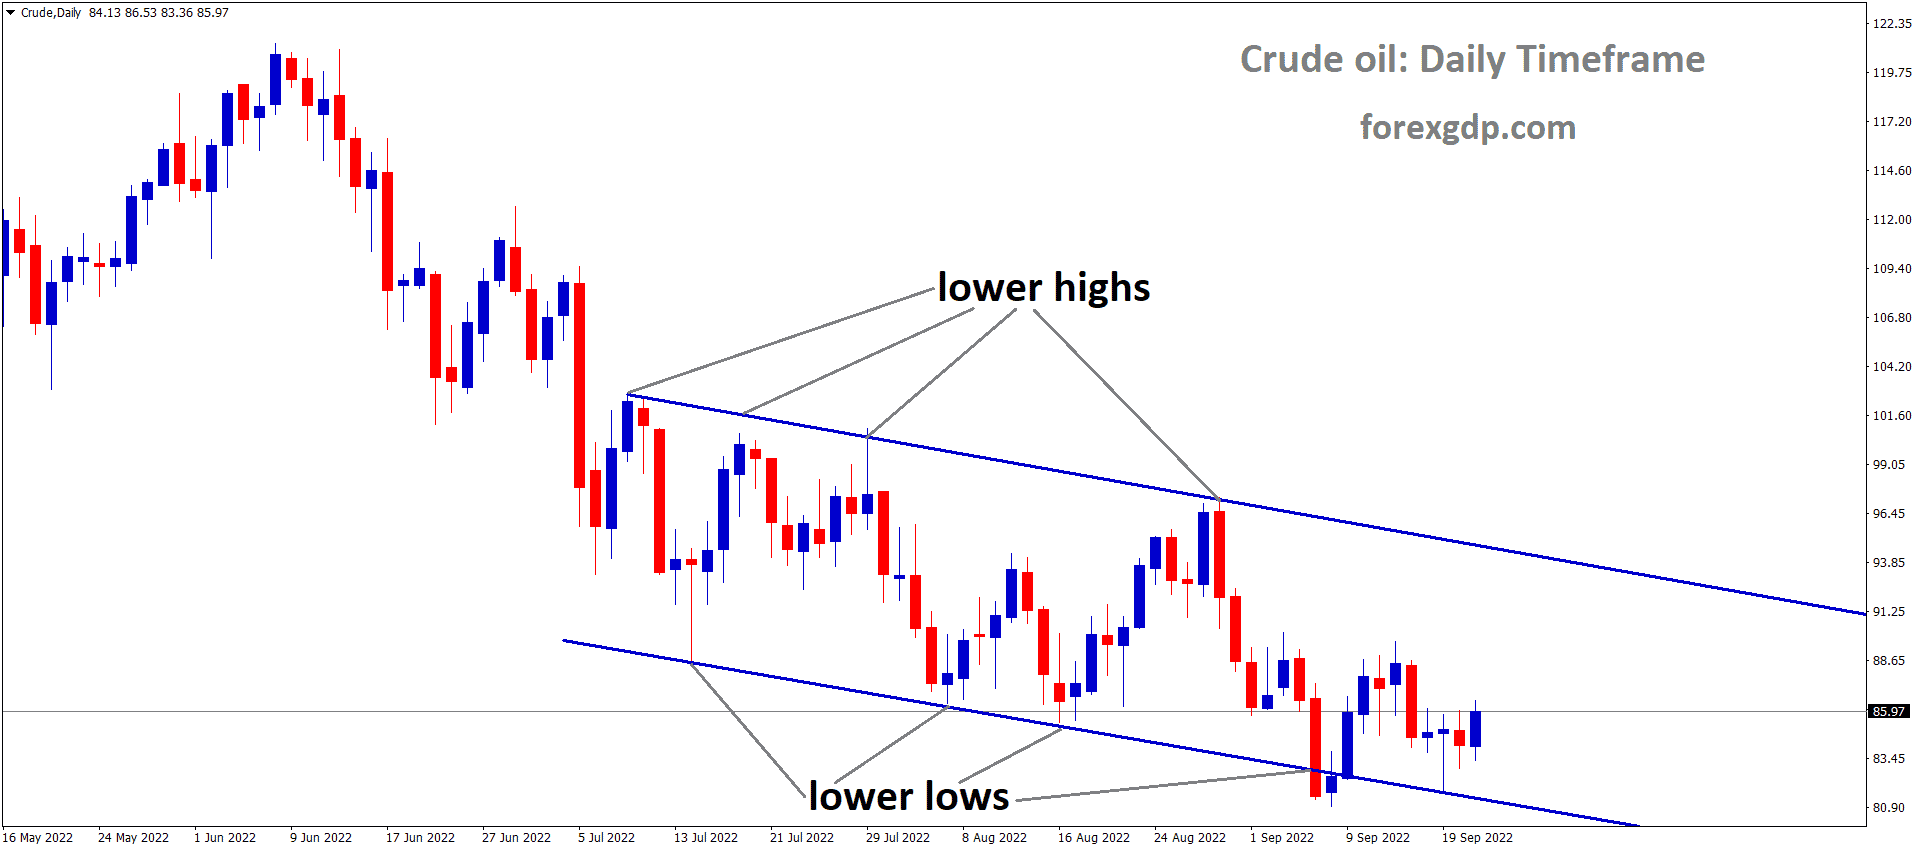 Crude Oil price is moving in the Descending channel and the market has rebounded from the lower low area of the channel 1